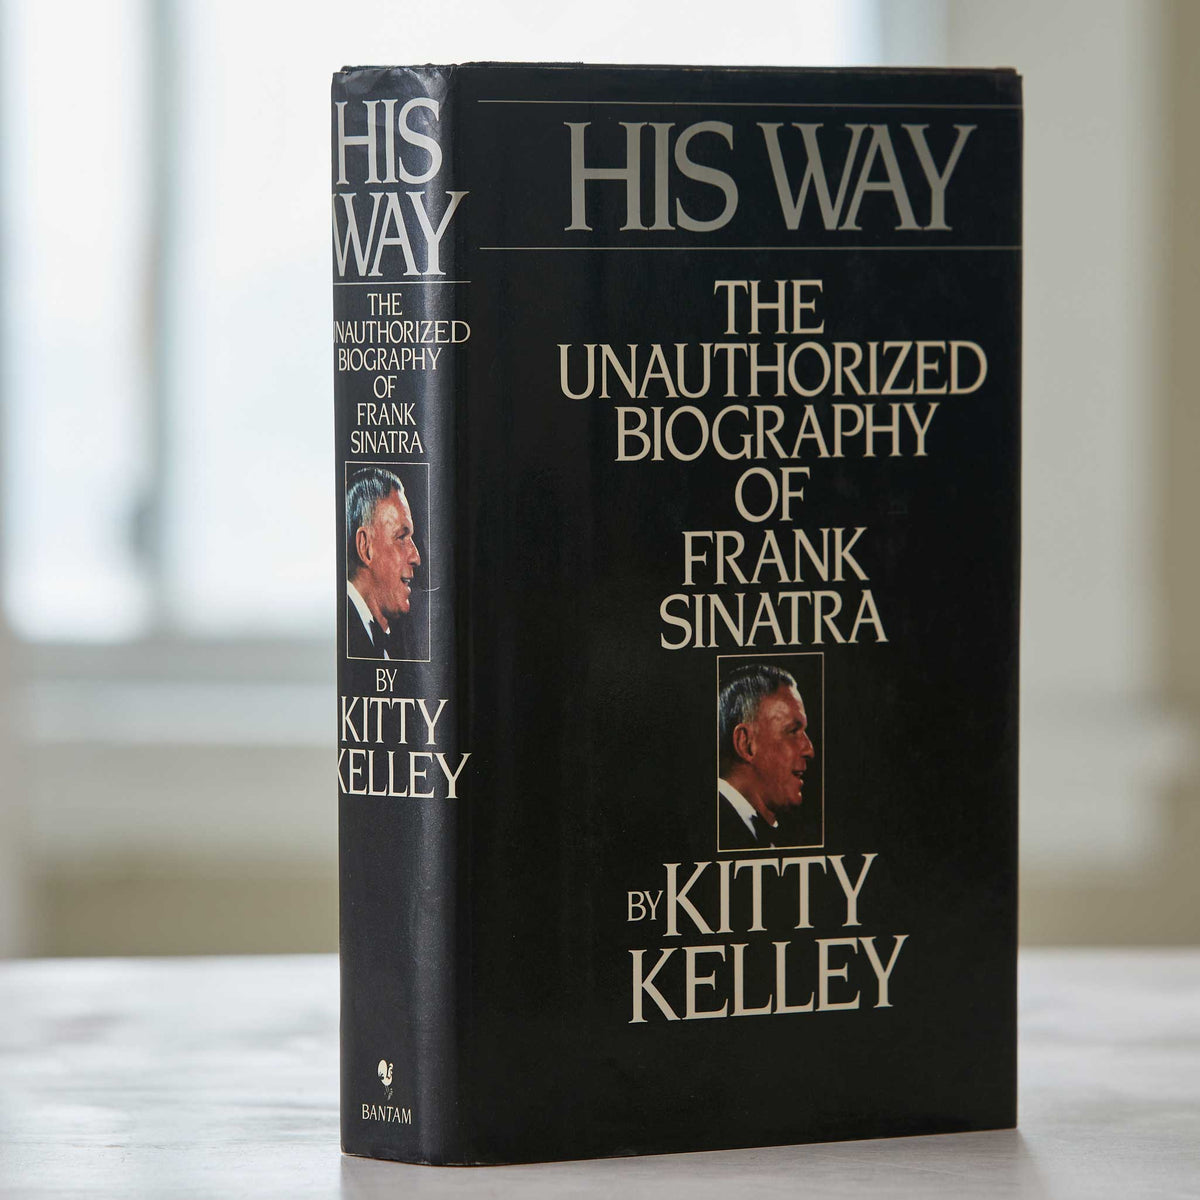 HIS WAY, THE UNAUTHORIZED BIOGRAPHY OF FRANK SINATRA